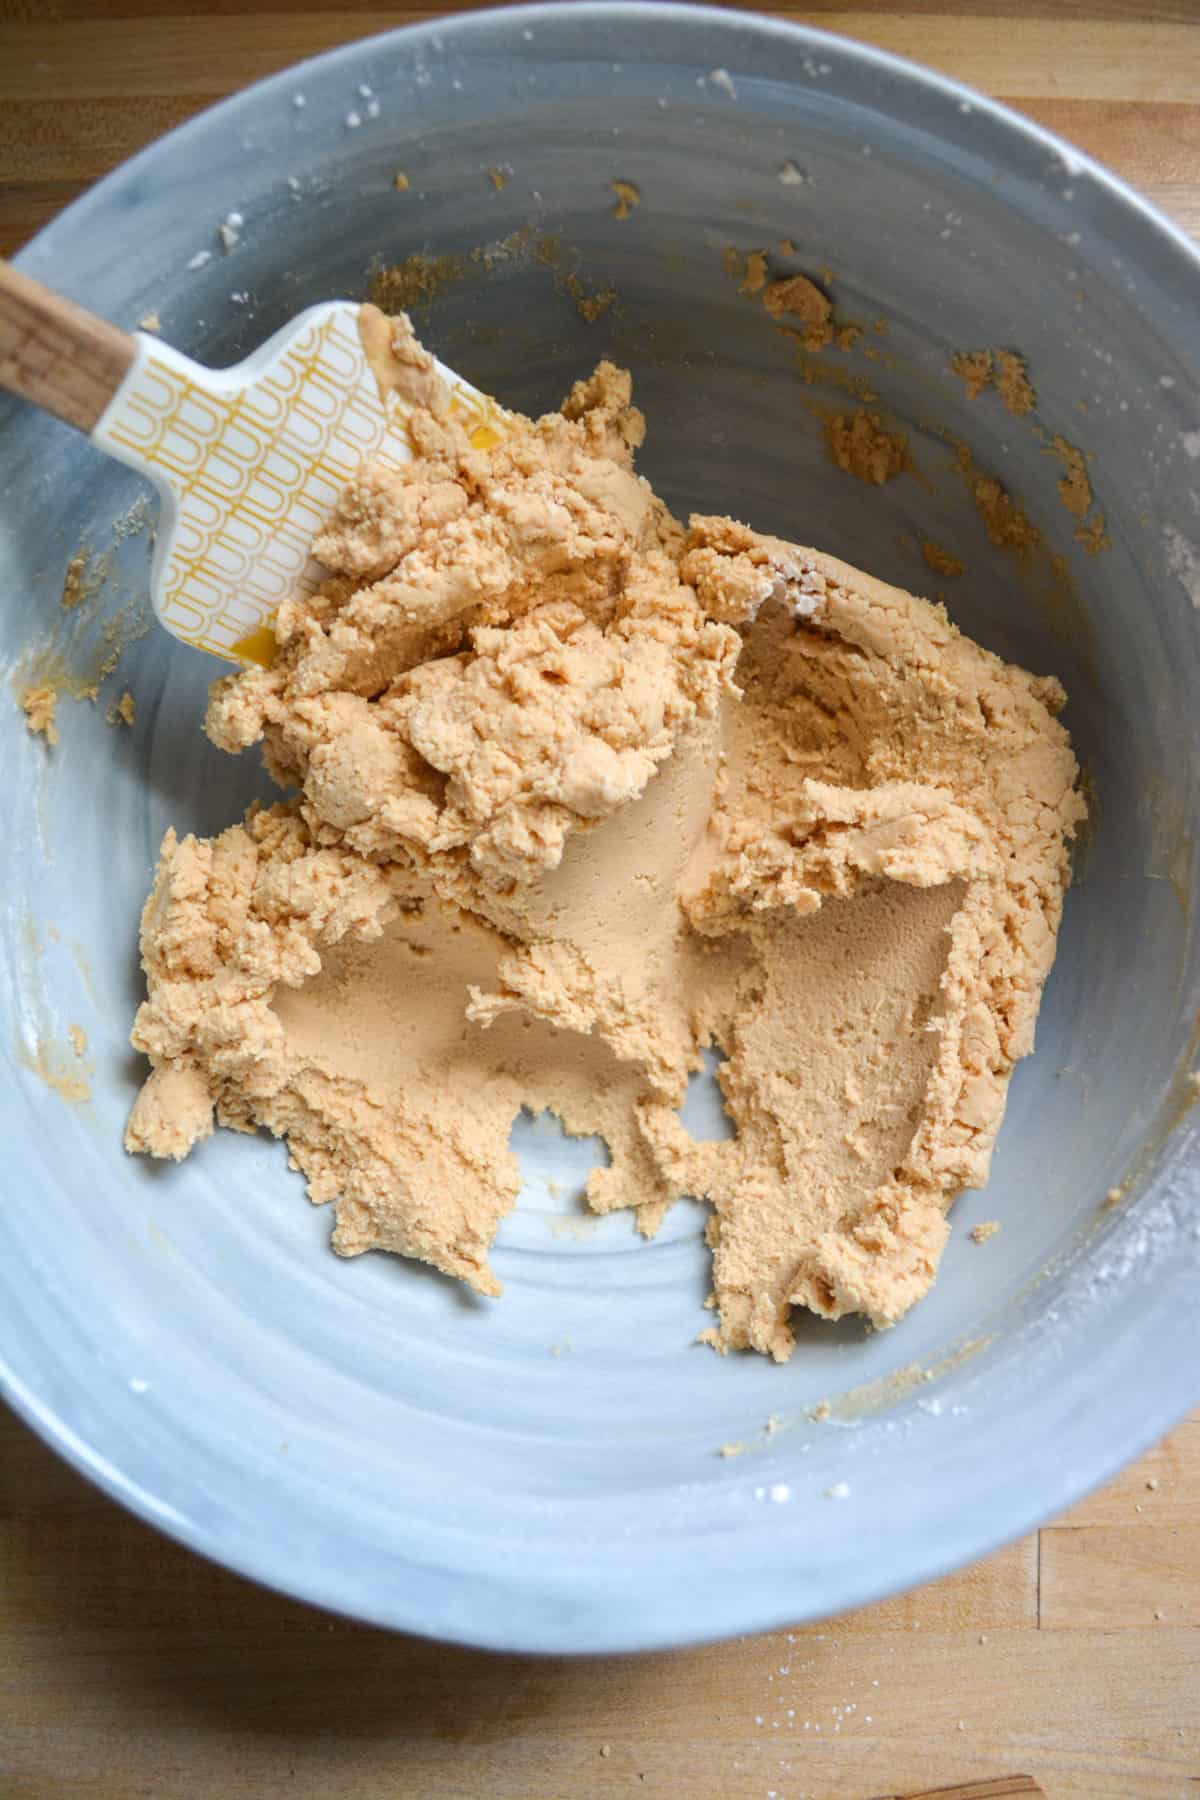 Powdered sugar mixed into the butter and cookie butter mixture with a spatula in the bowl.